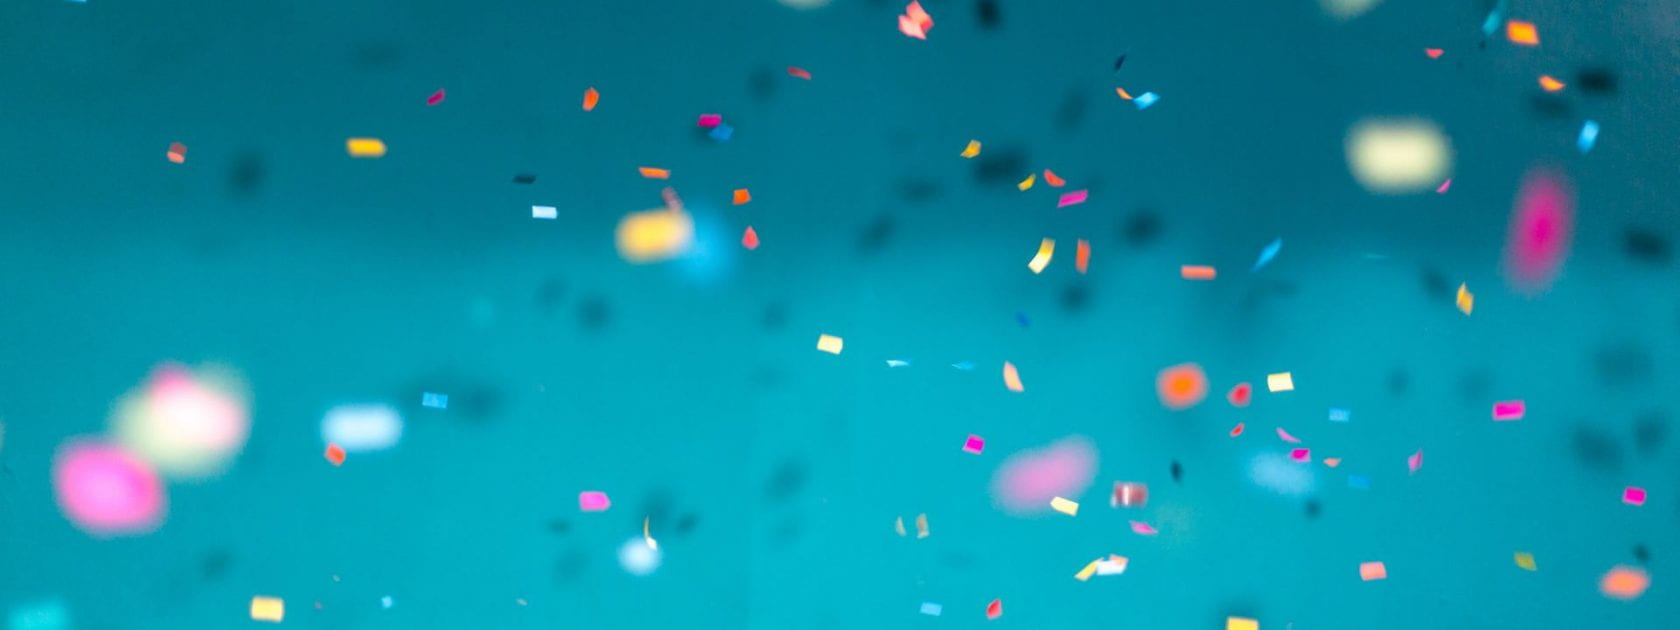 Image shows colour confetti on a blue background.